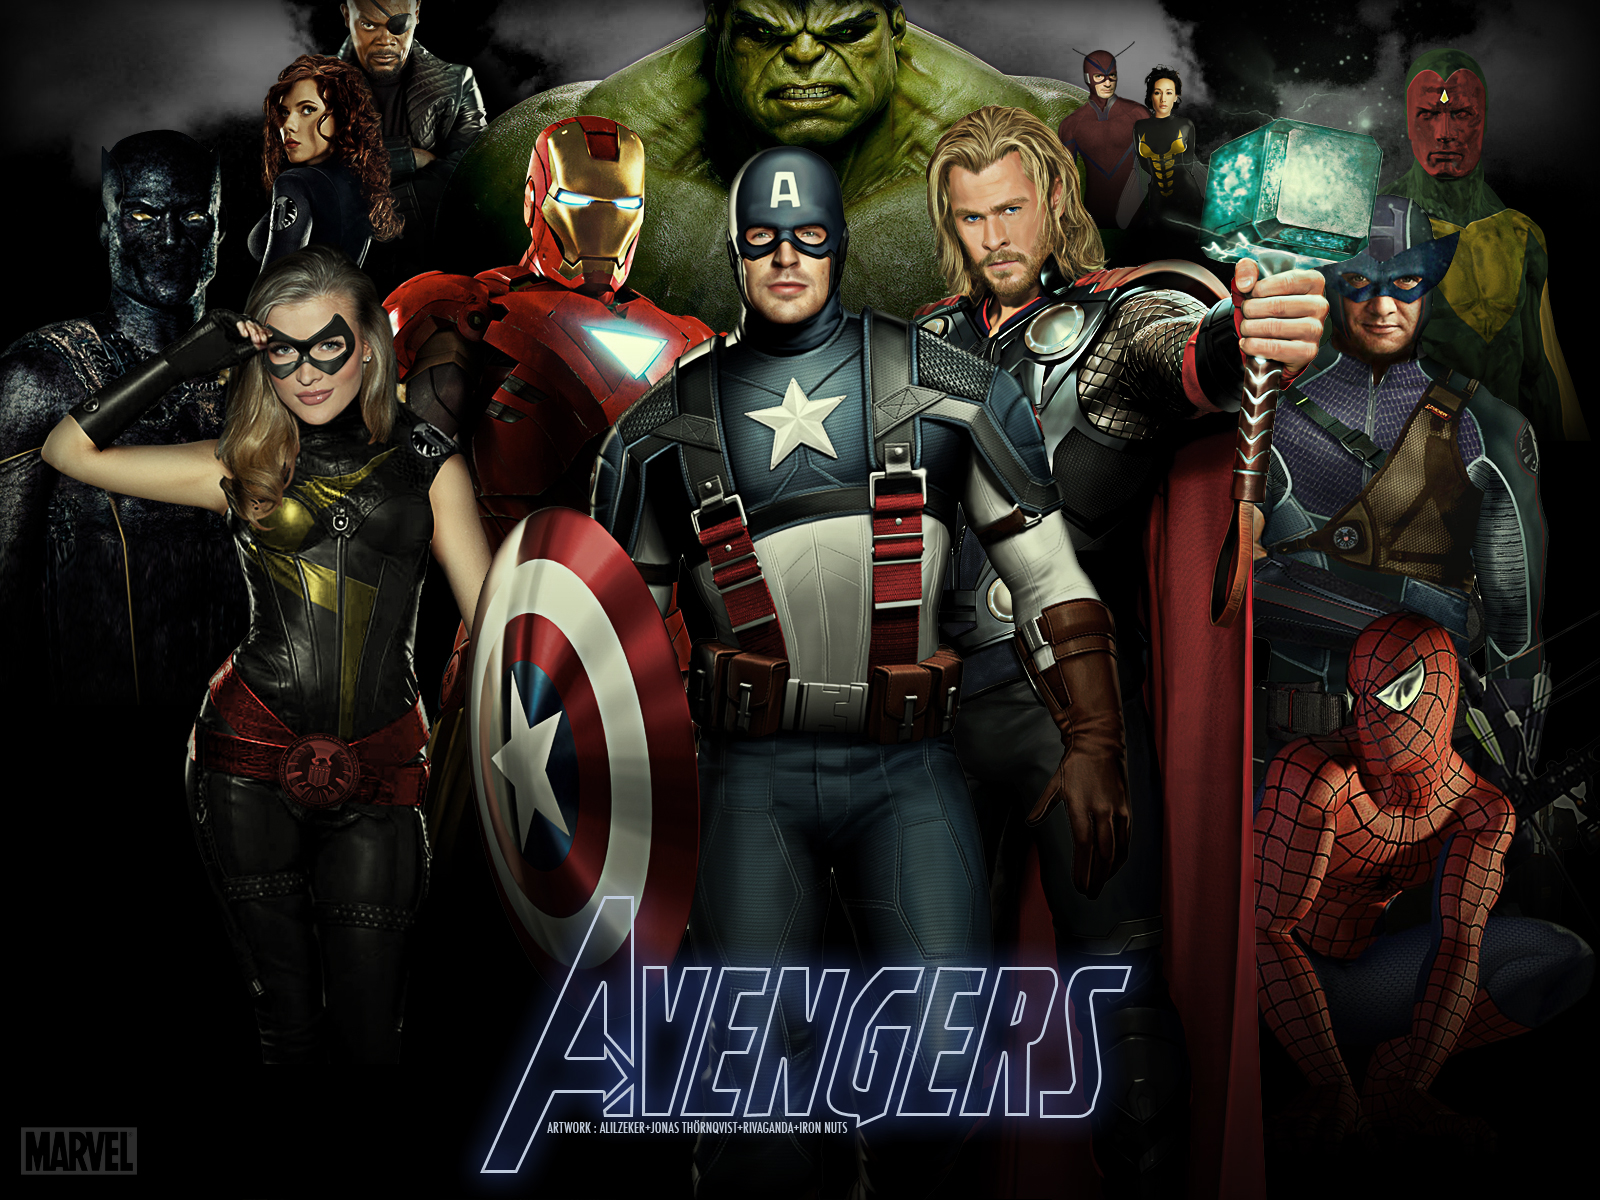  the avengers backgrounds widescreen 4 3 16 9 and hd wallpapers